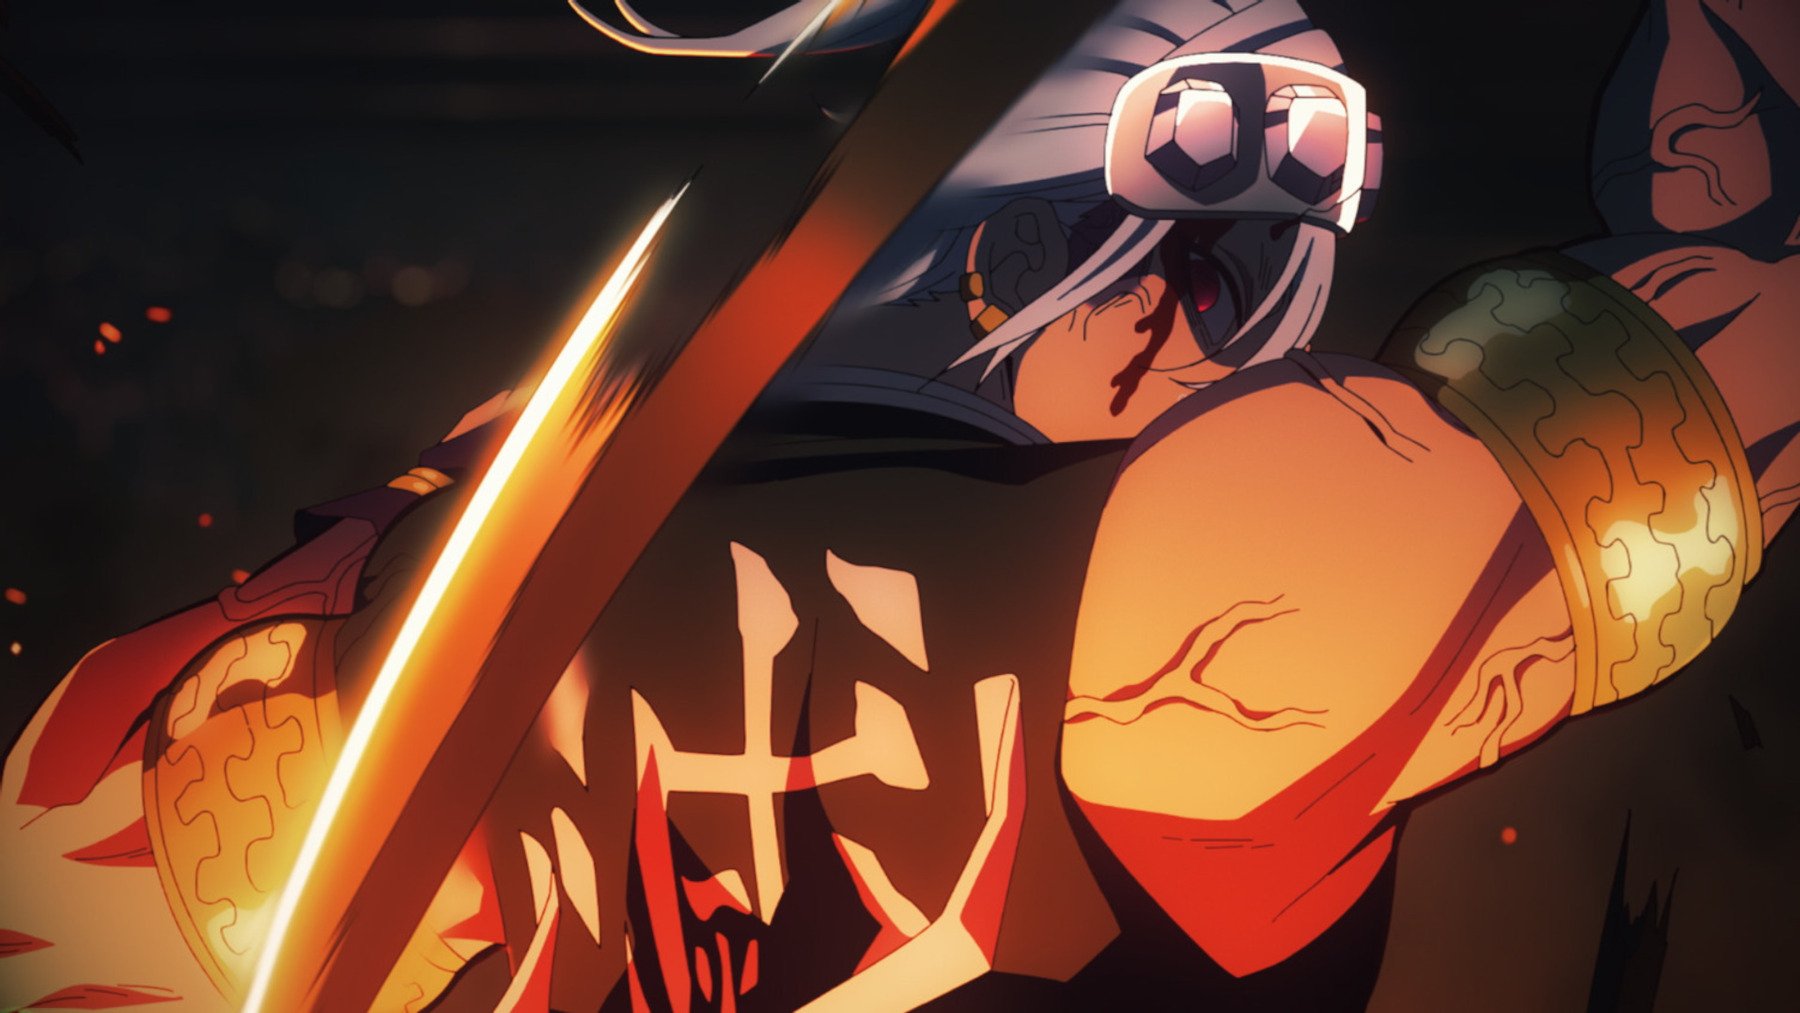 Sound Hashira Tengen Uzui holding a blade. The image shows him from behind, and he has blood pouring down his face.